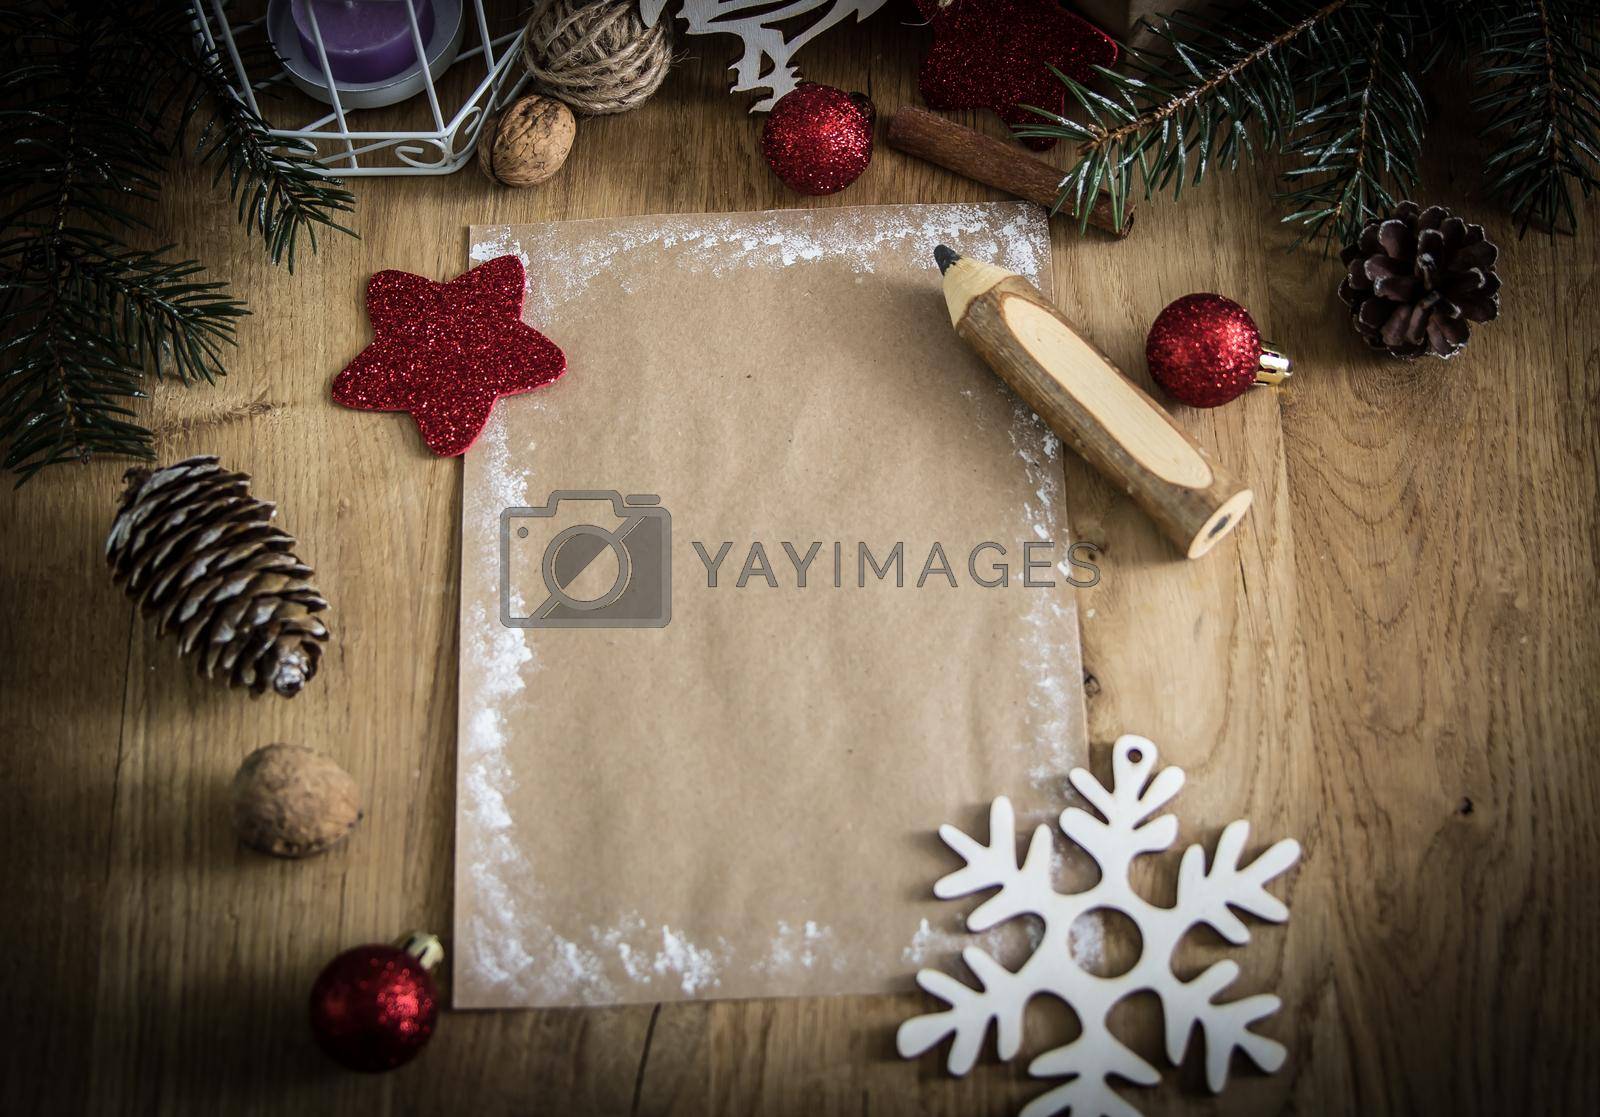 Royalty free image of greeting card and pencil in the Christmas background. by SmartPhotoLab